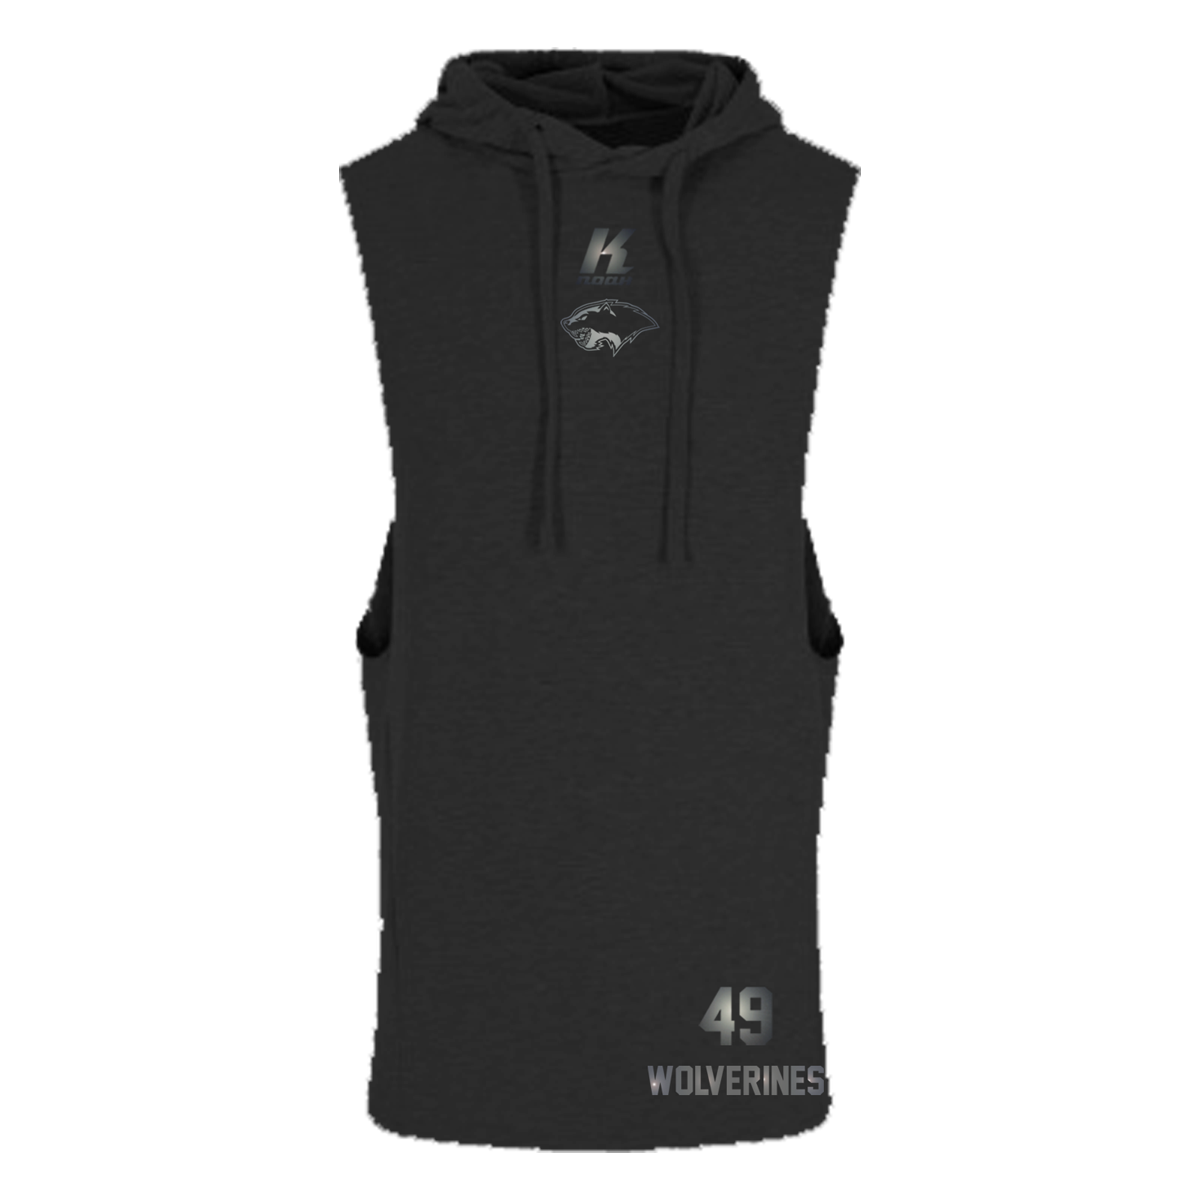 Wolverines "Blackline" Sleeveless Muscle Hoodie JC053 with Playernumber or Initials